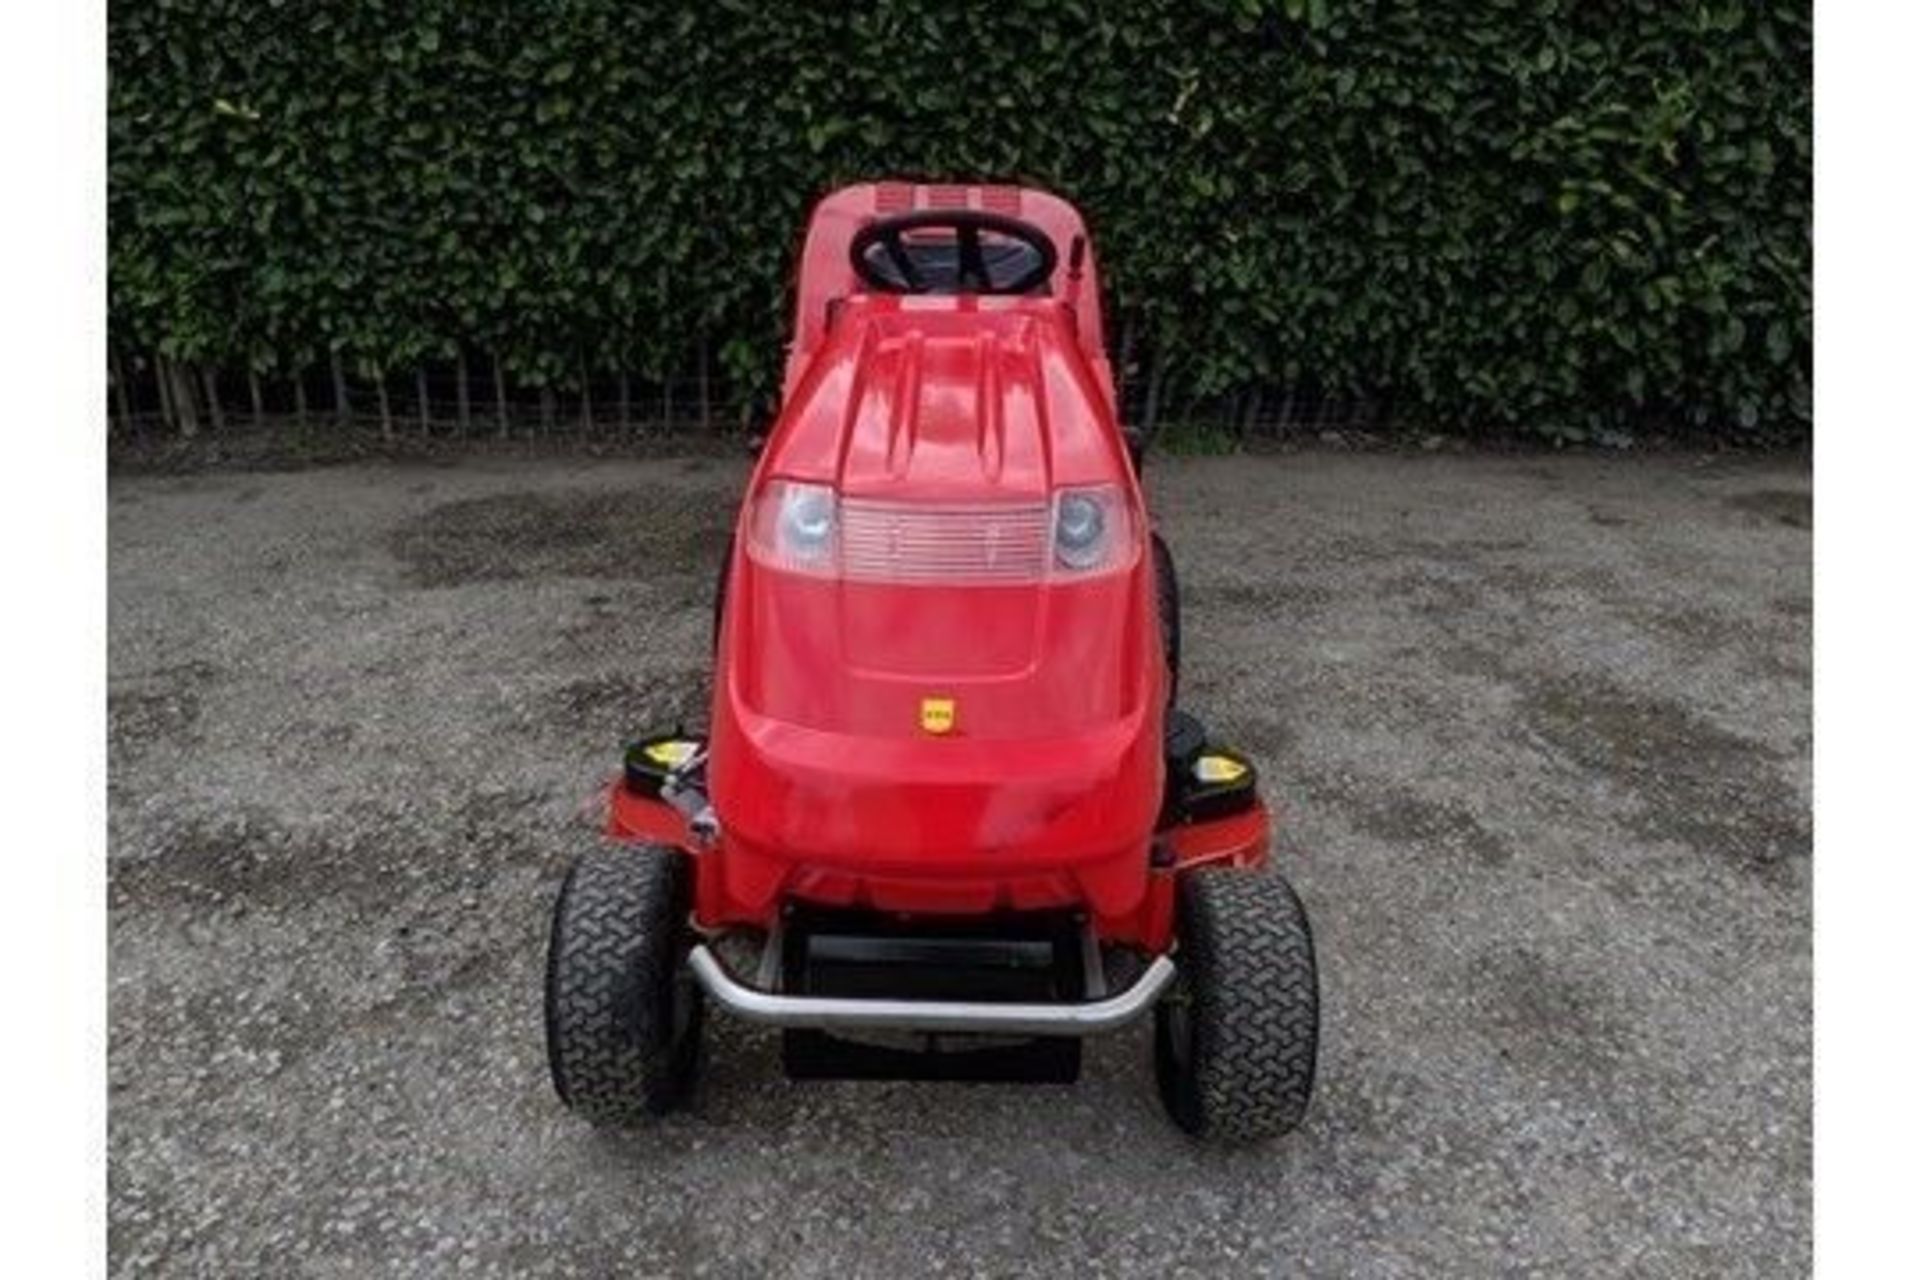 Countax C600HE 44" Rear Discharge Garden Tractor With PGC - Image 3 of 6